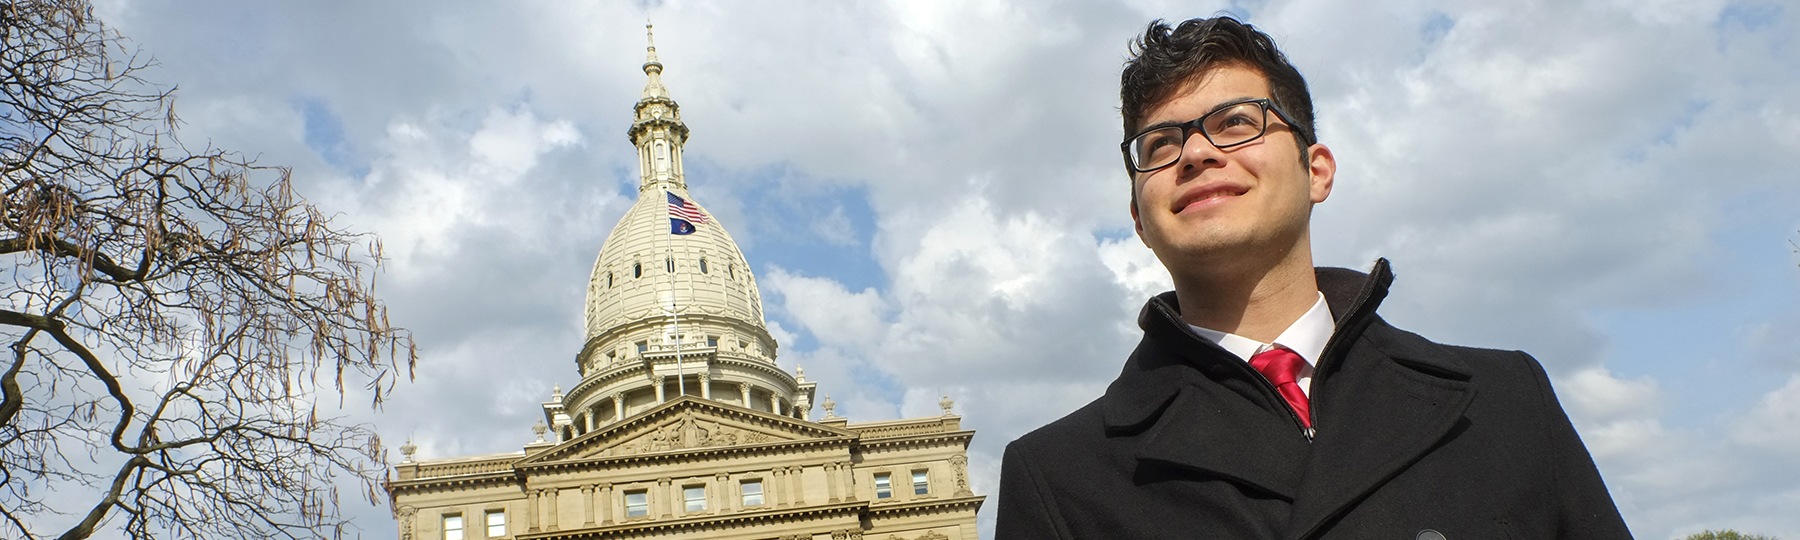 Central Michigan University political science student in front of the capitol building in Lansing